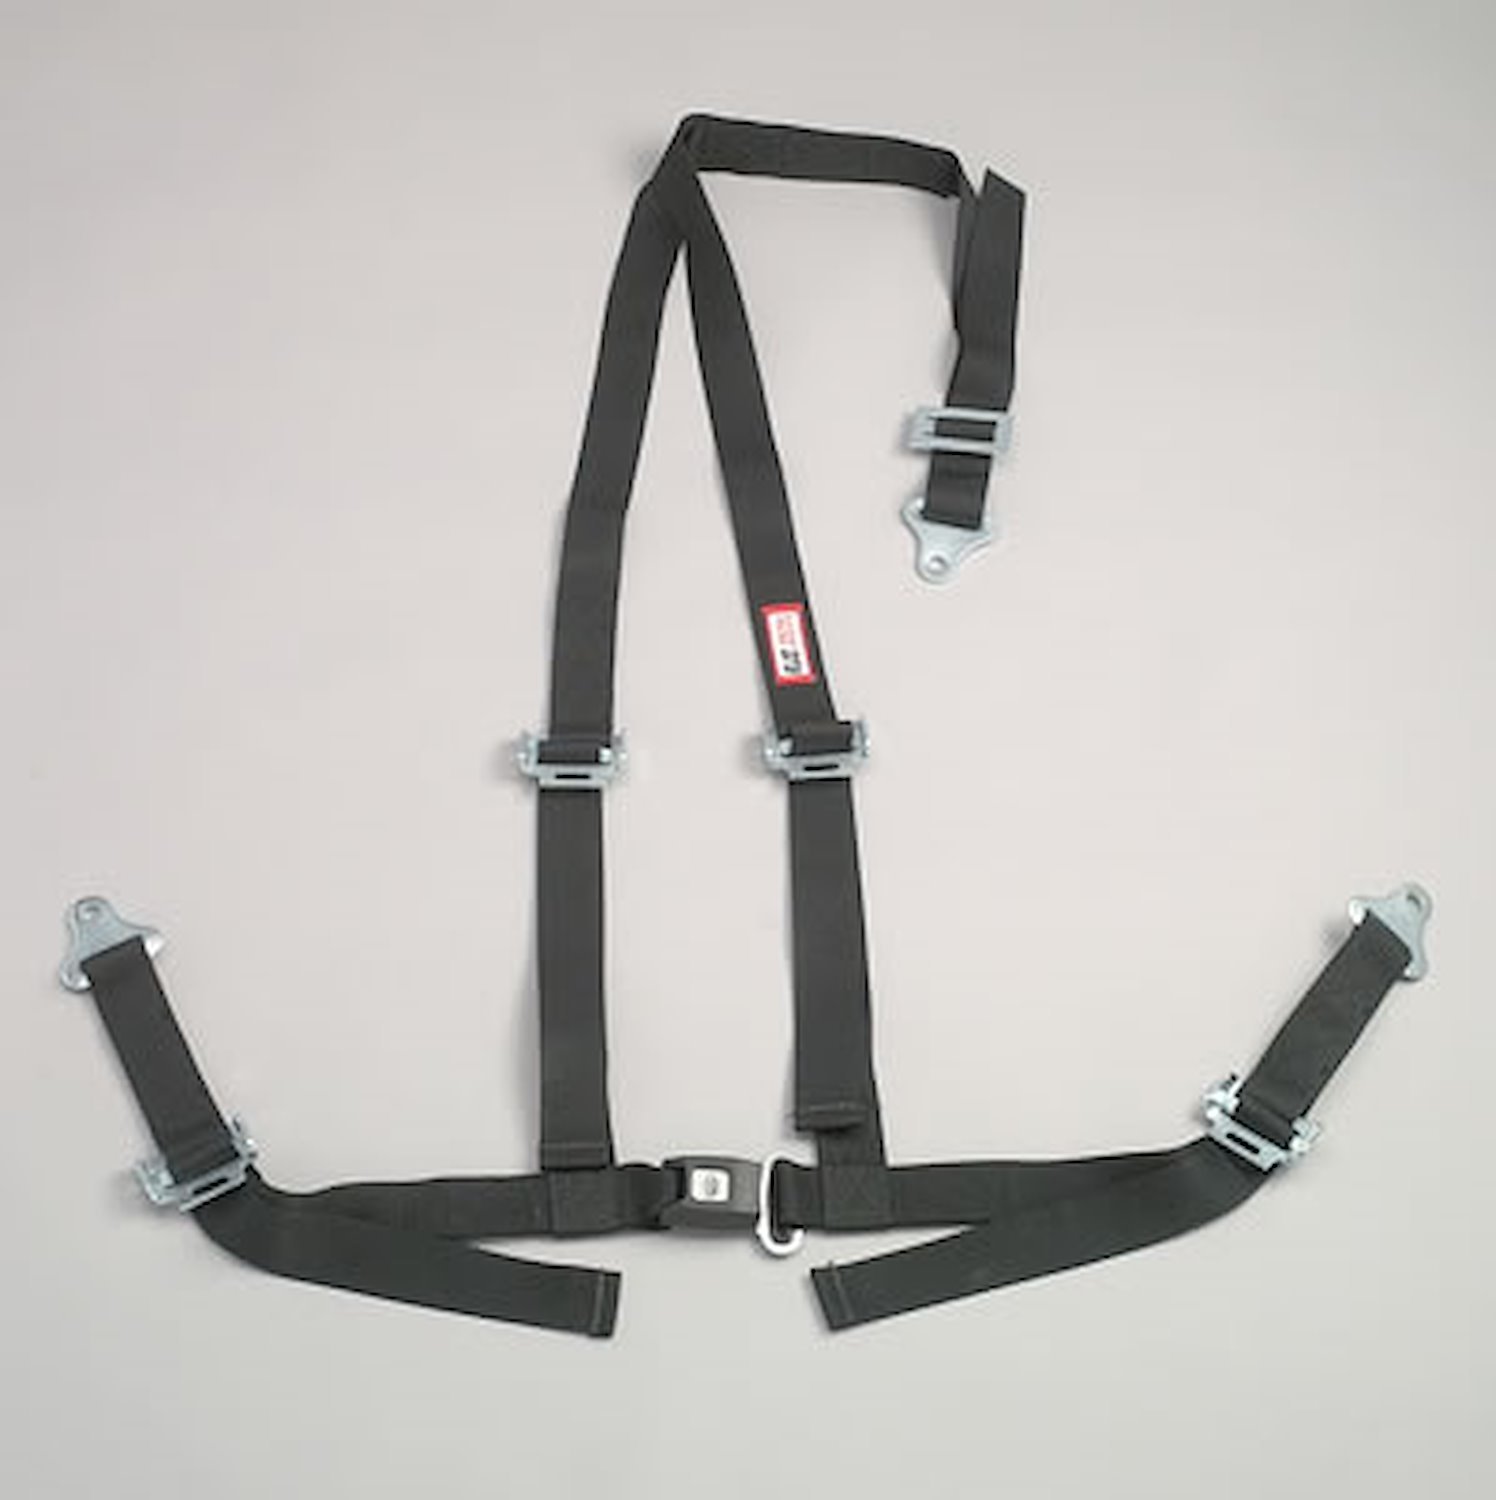 NON-SFI B&T HARNESS 2 PULL UP Lap Belt 2 S. H. V ROLL BAR Mount ALL SNAP ENDS w/STERNUM STRAP KHAKI